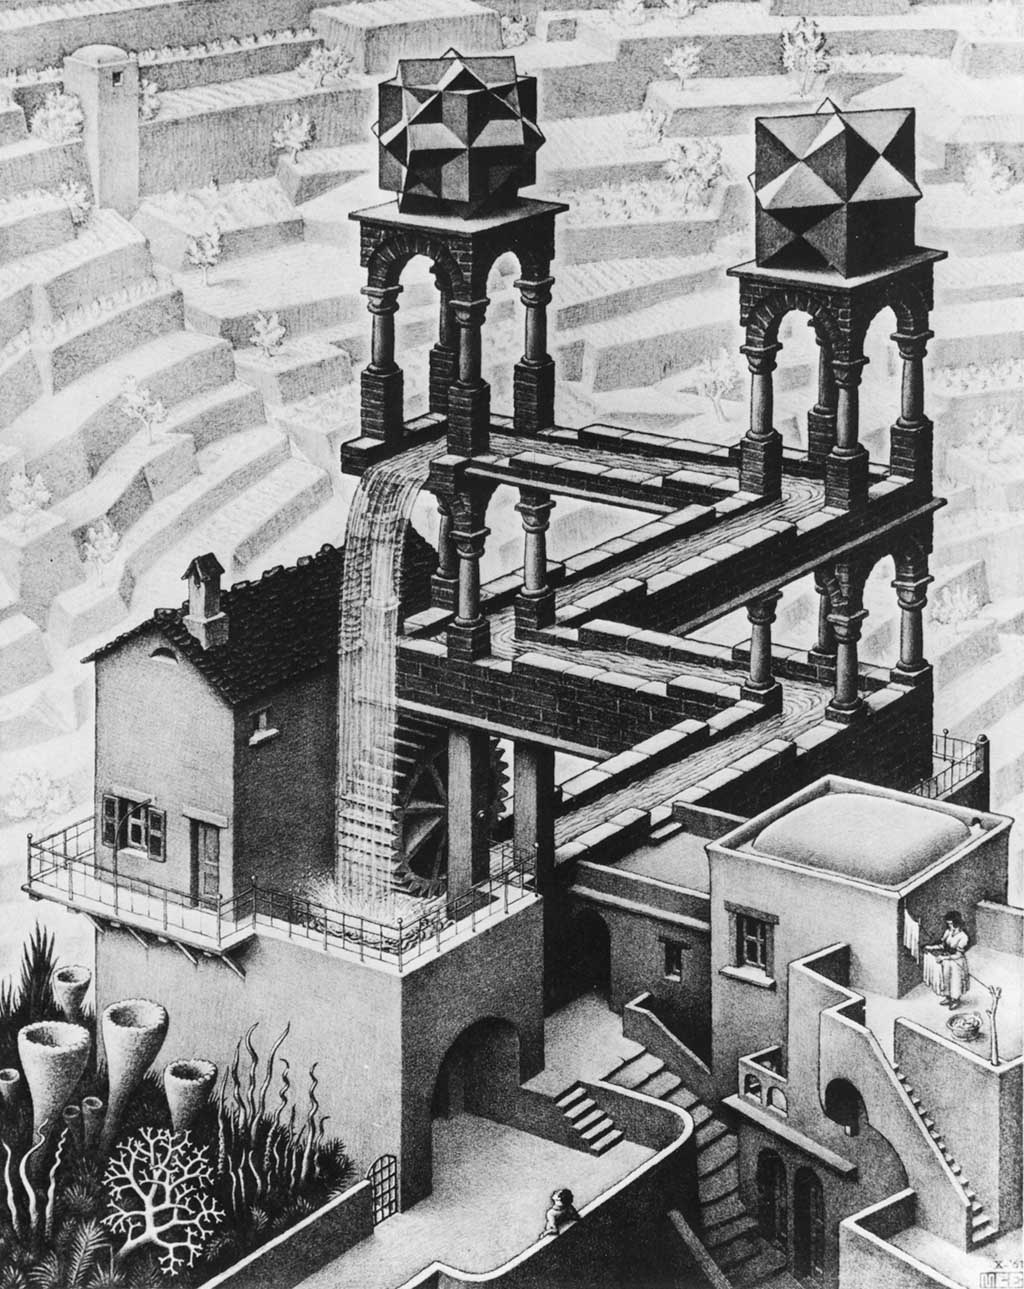 Presentation assignments: life and work of M.C. Escher (drafts due Monday, 